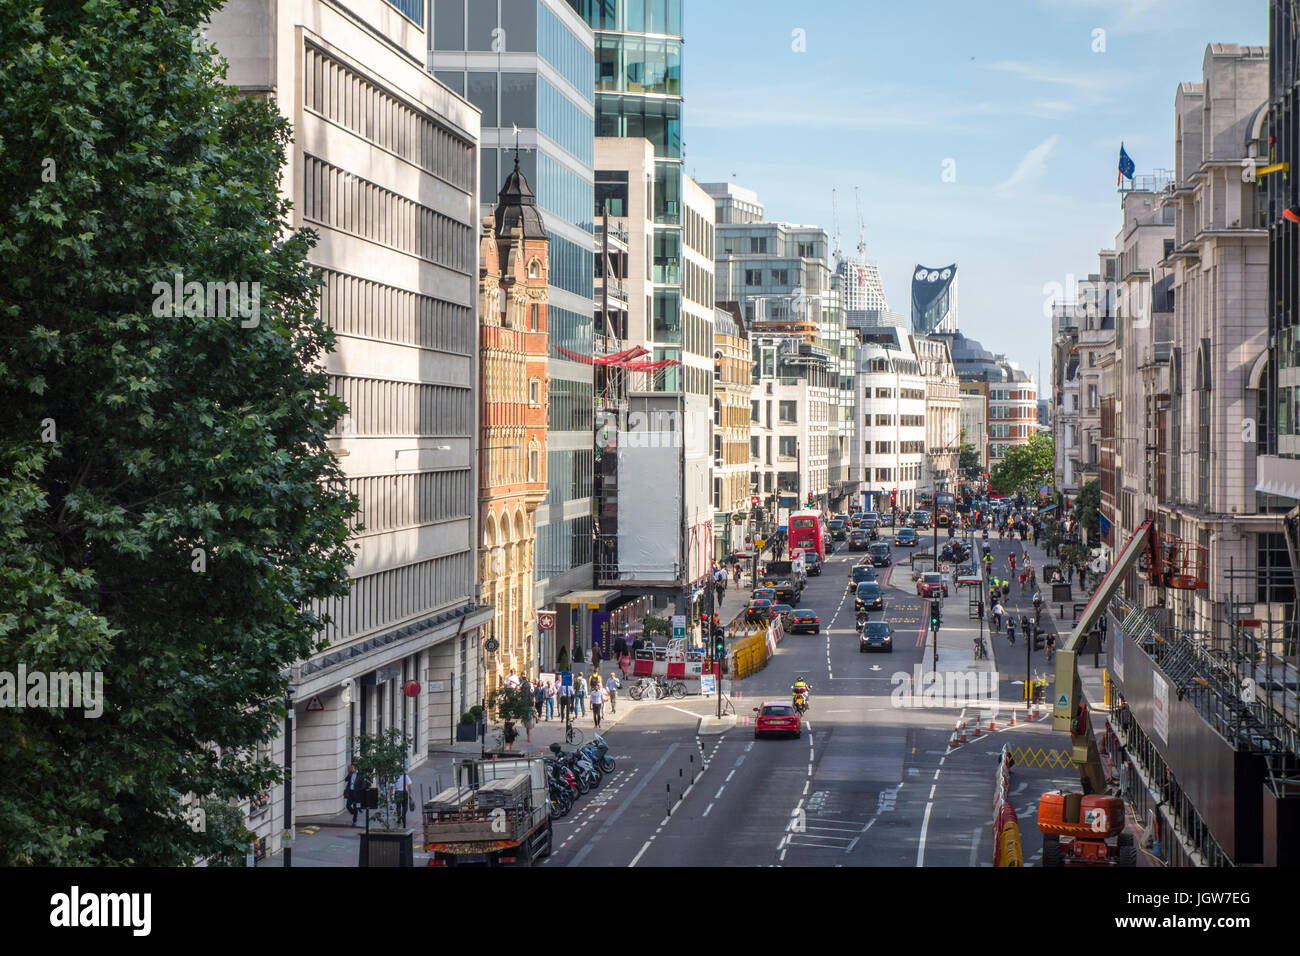 View of Farringdon Street looking south from Holborn Viaduct, City of London, UK Stock Photo